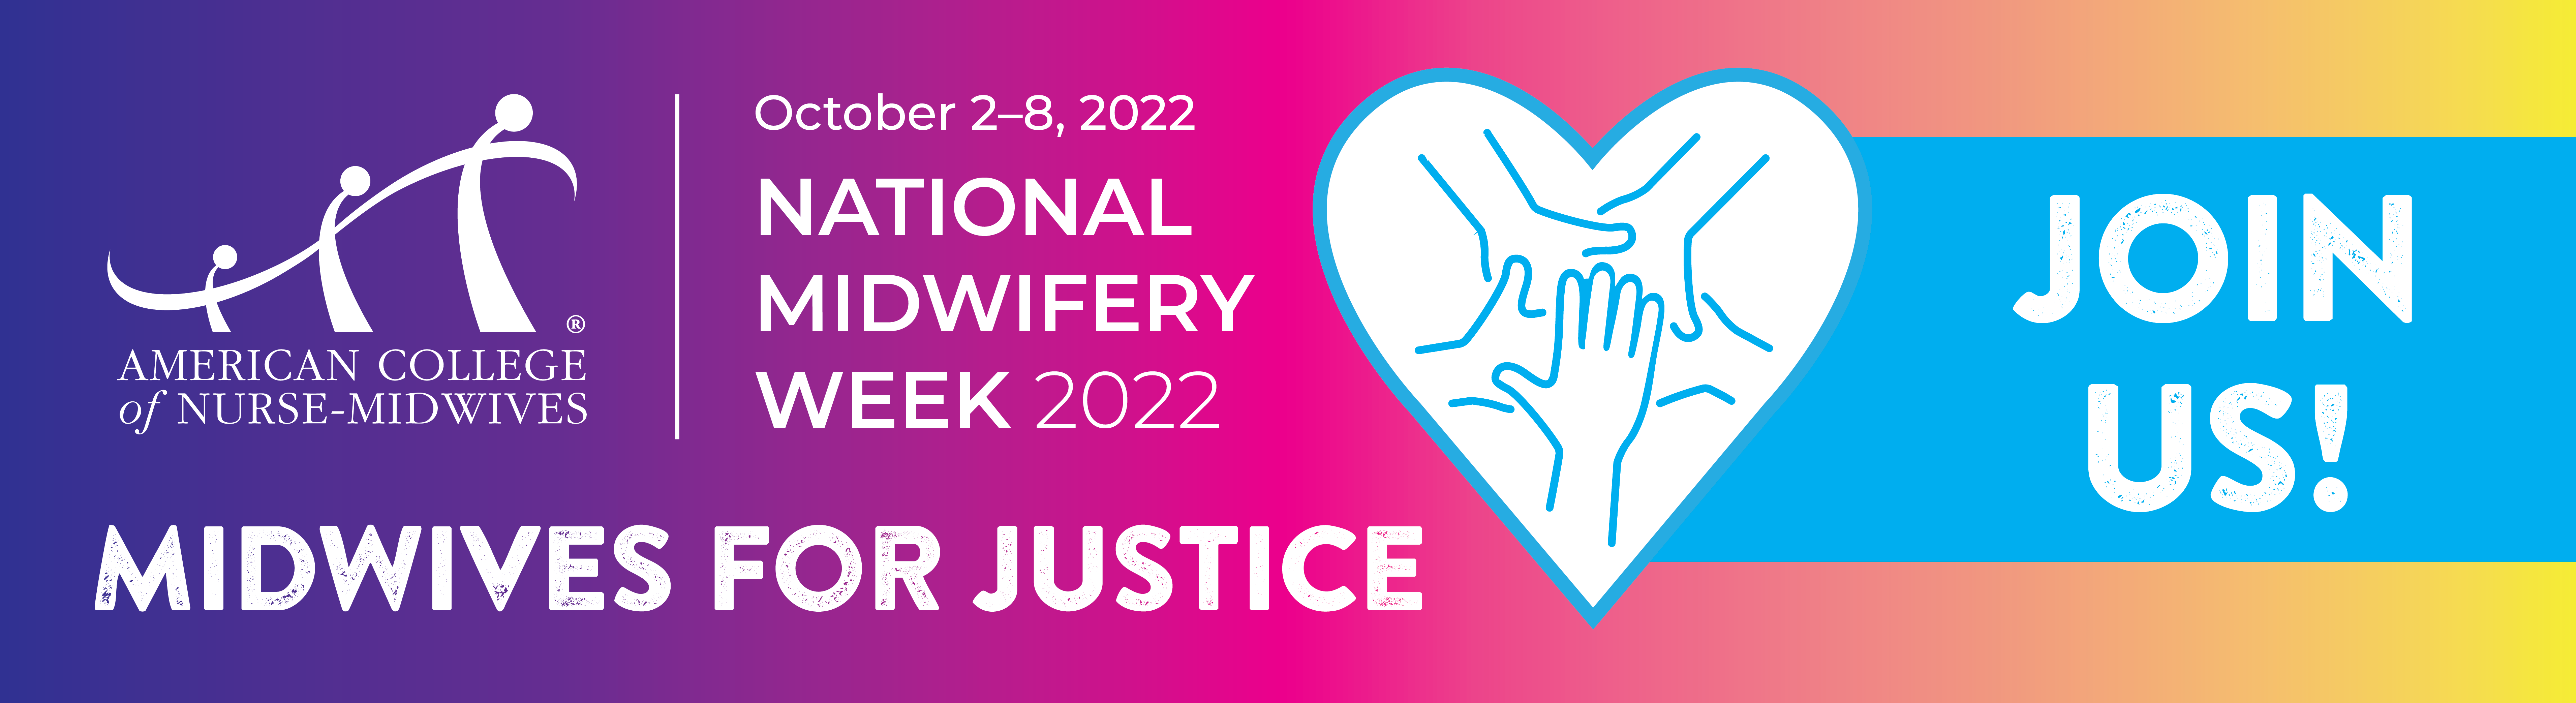 NMW2022 - Midwives for Justice - Banner 2